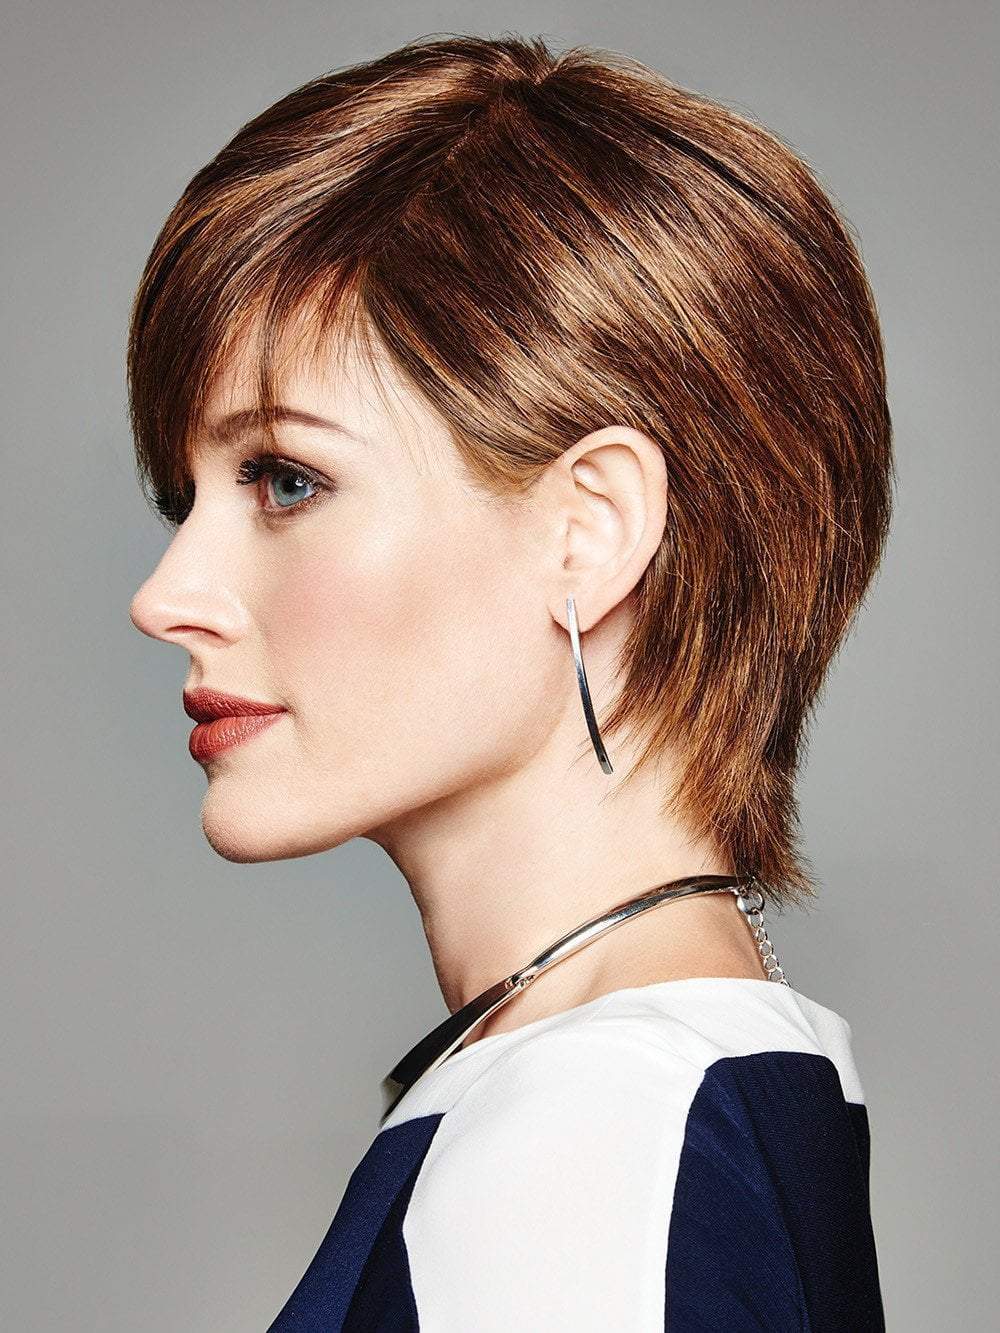 The Without Consequence Wig by Raquel Welch brings style and sophistication to an edgy haircut.